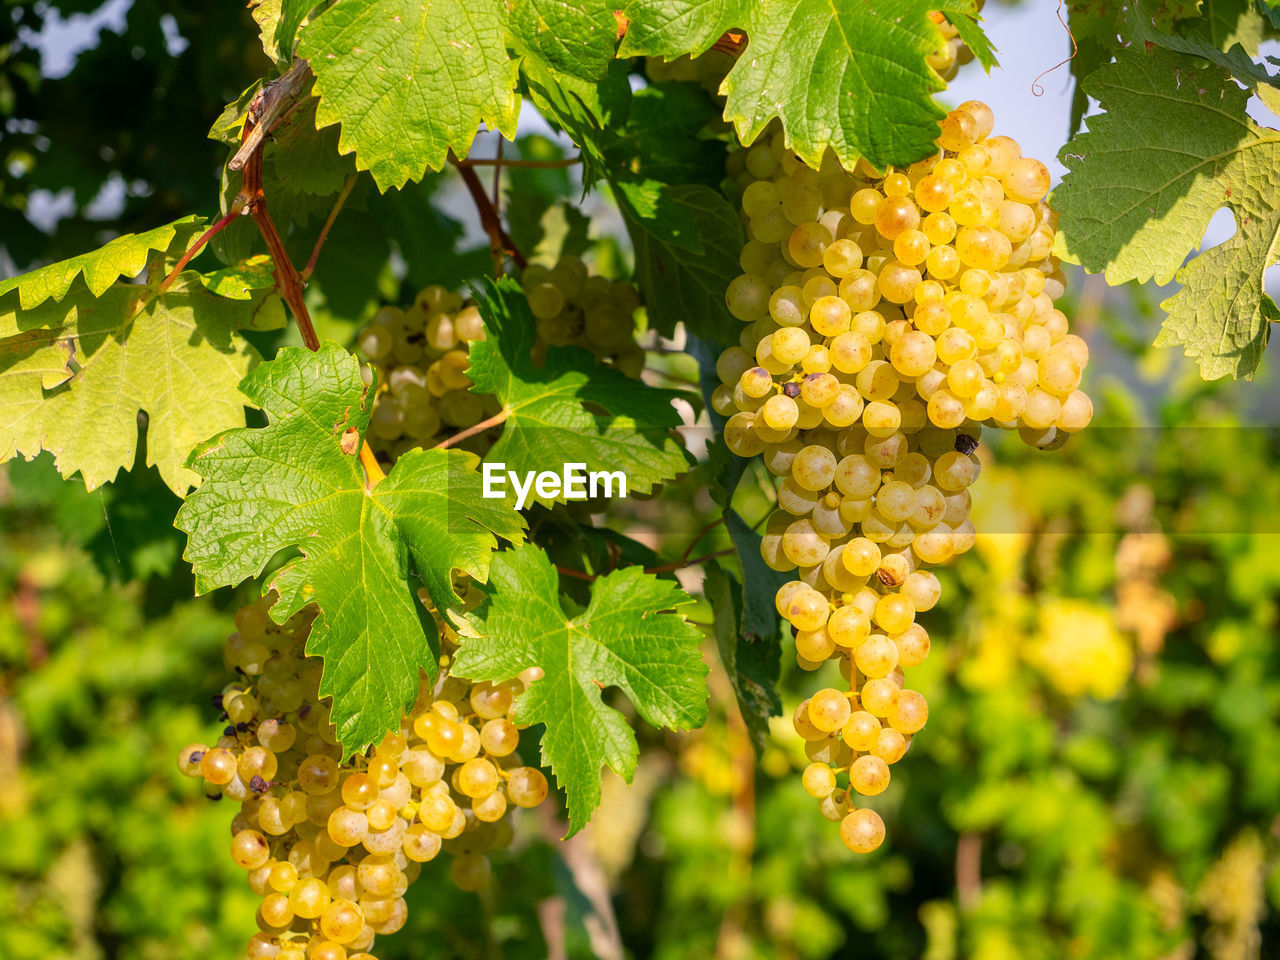 close-up of grapes growing on tree